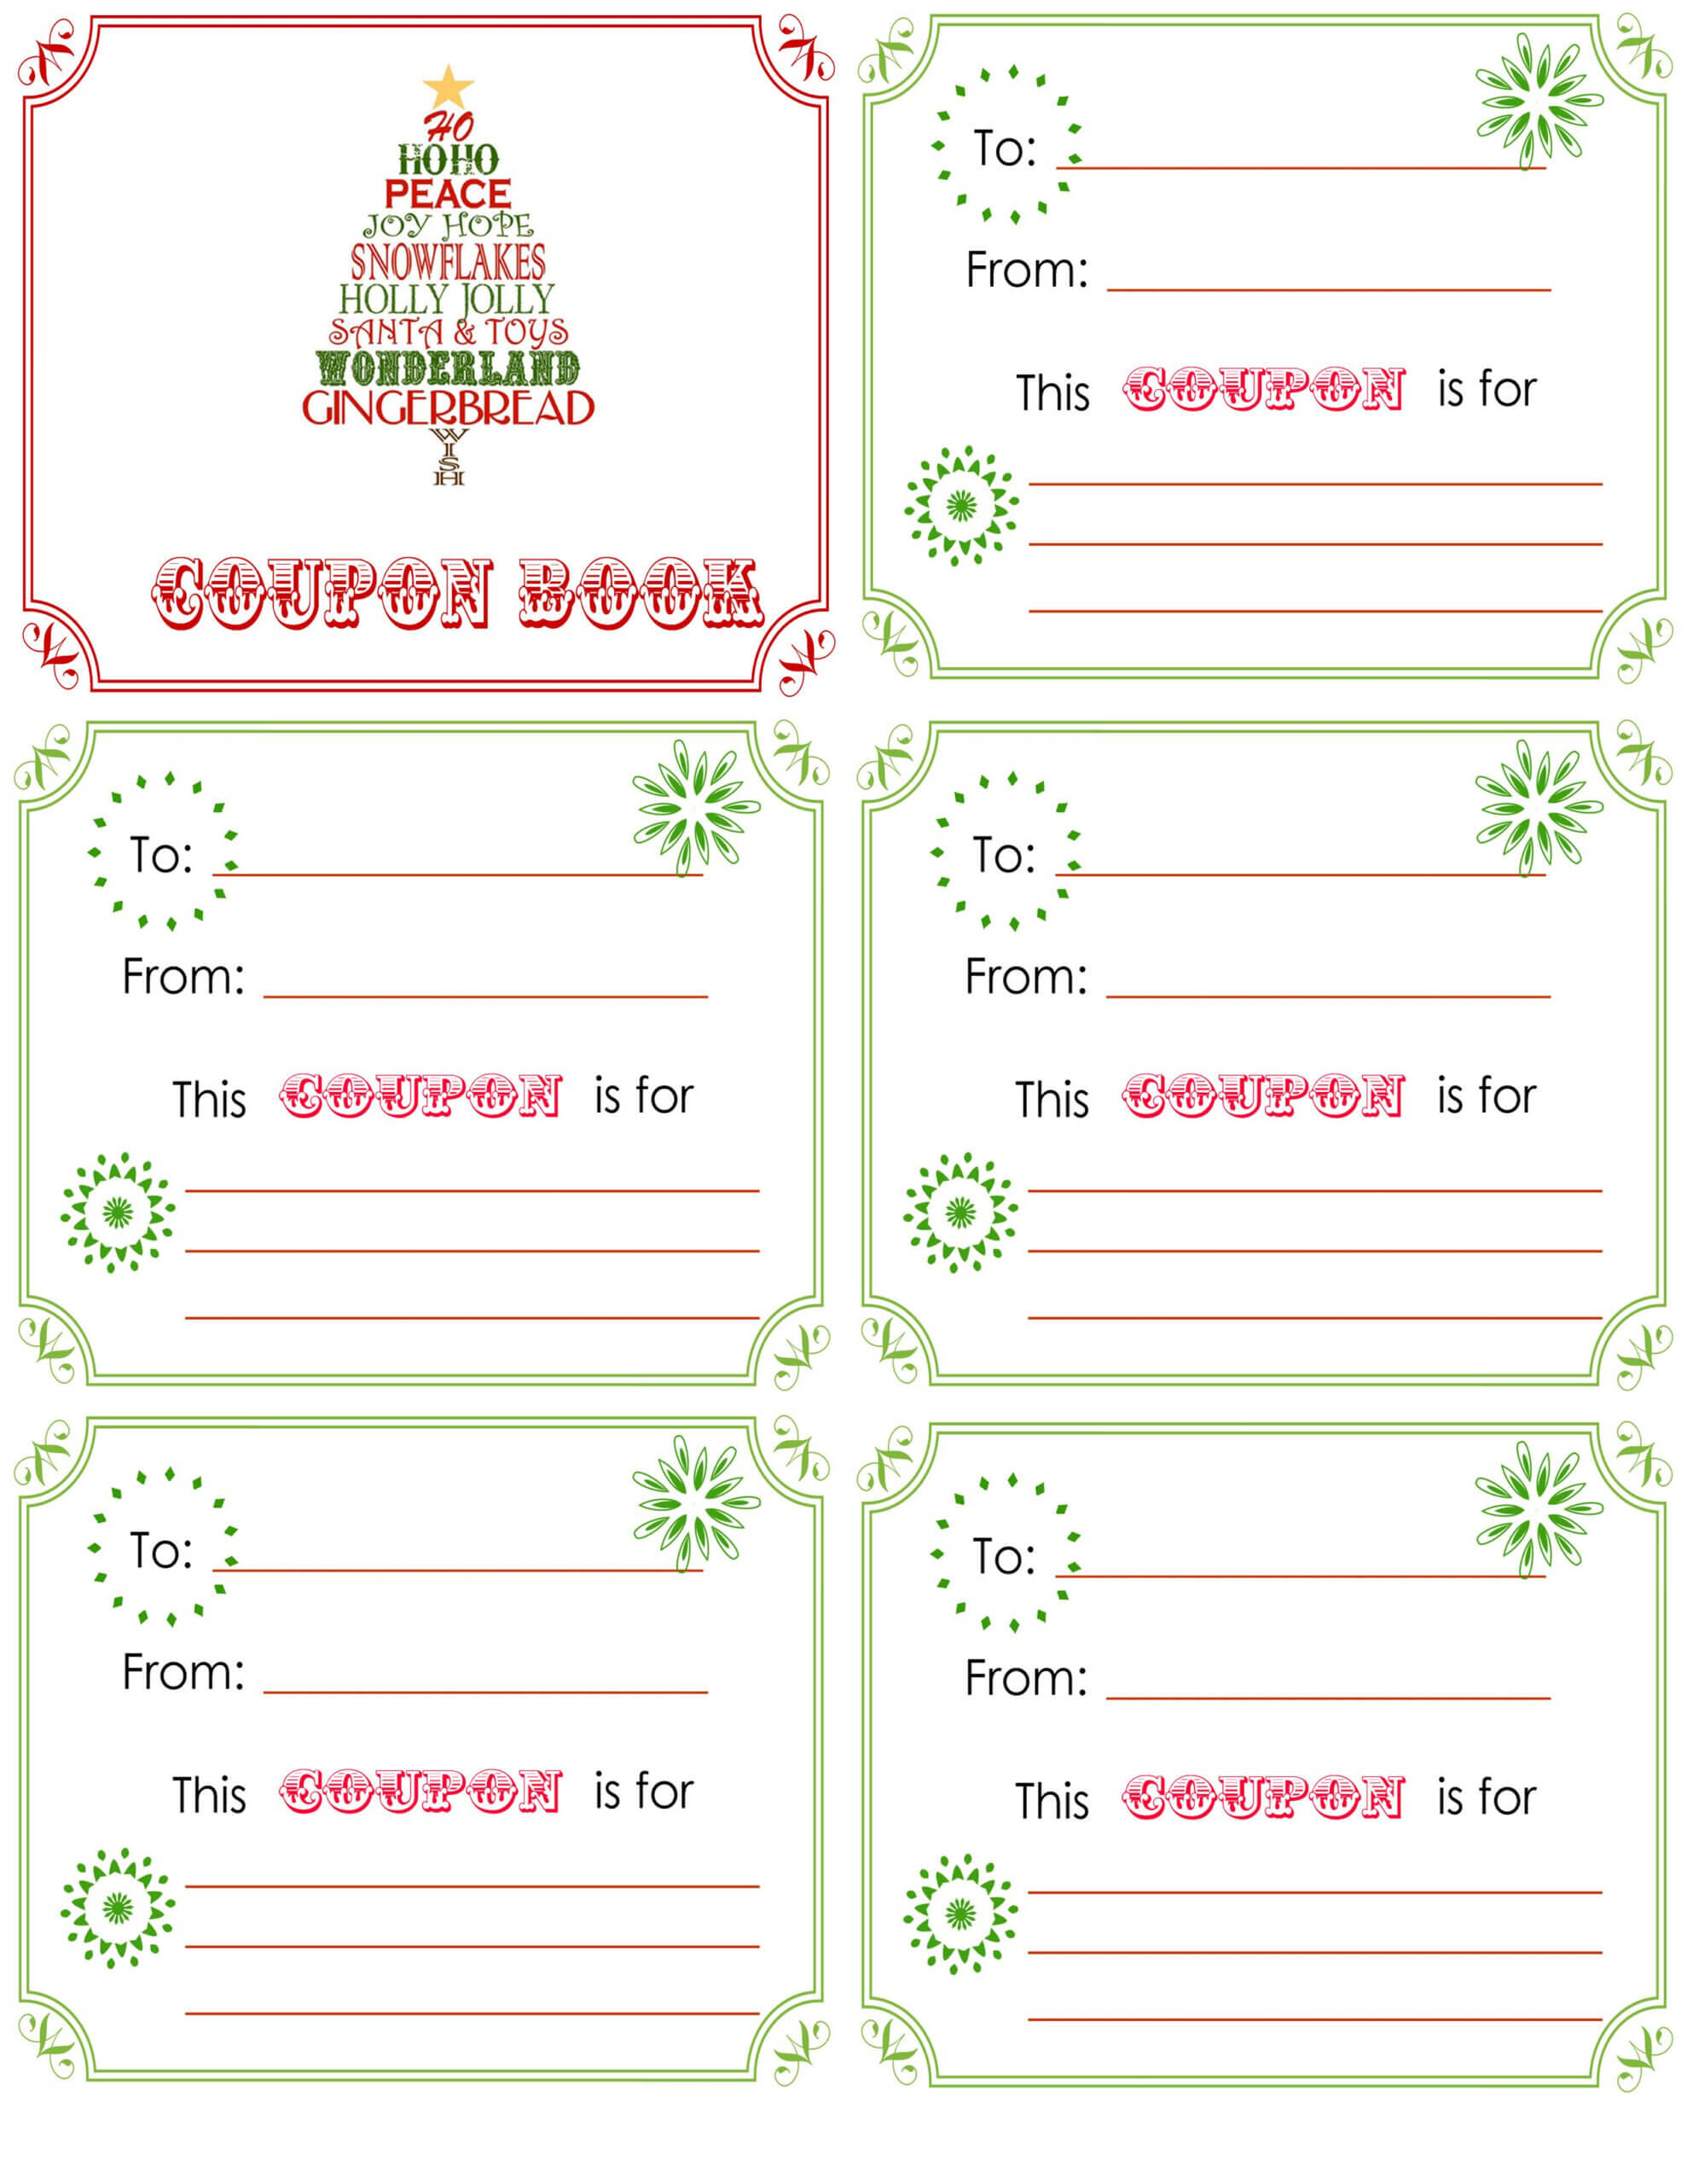 Printable Christmas Coupon Book. L Is Getting 15 Minute With Regard To Homemade Christmas Gift Certificates Templates